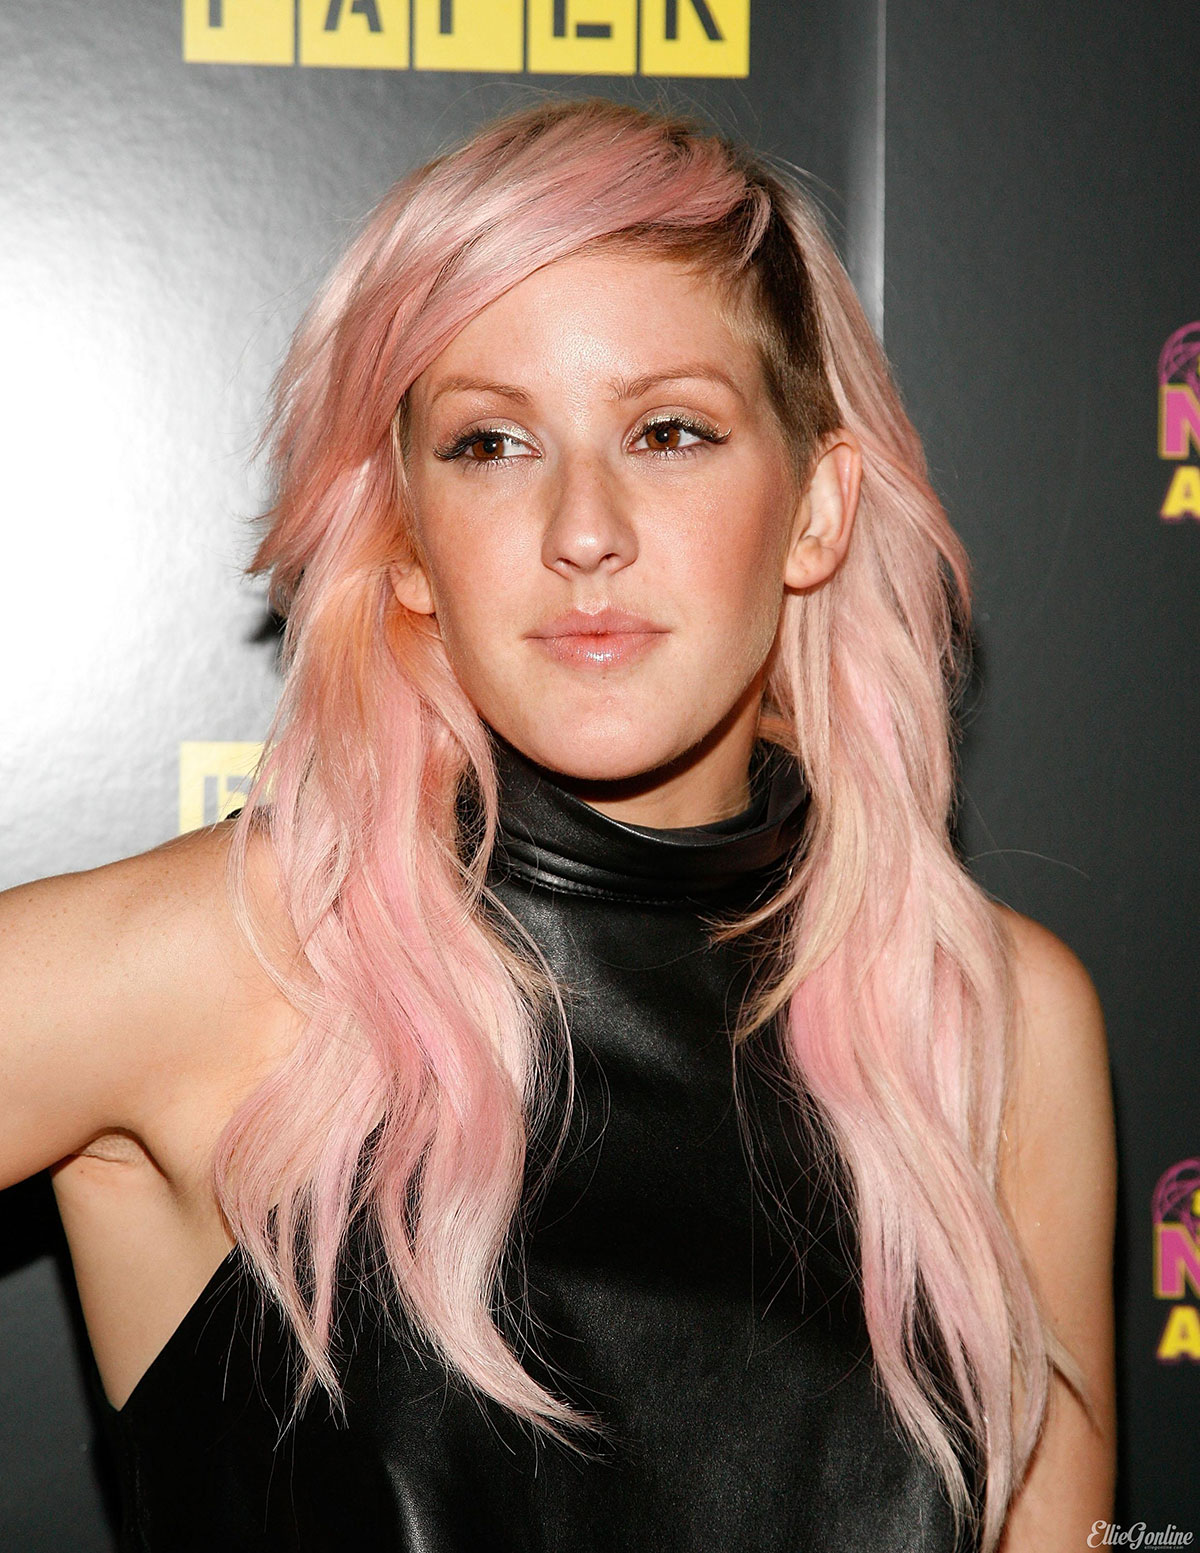 Ellie Goulding attends Paper Magazine’s 8th Anual Nightlife Awards